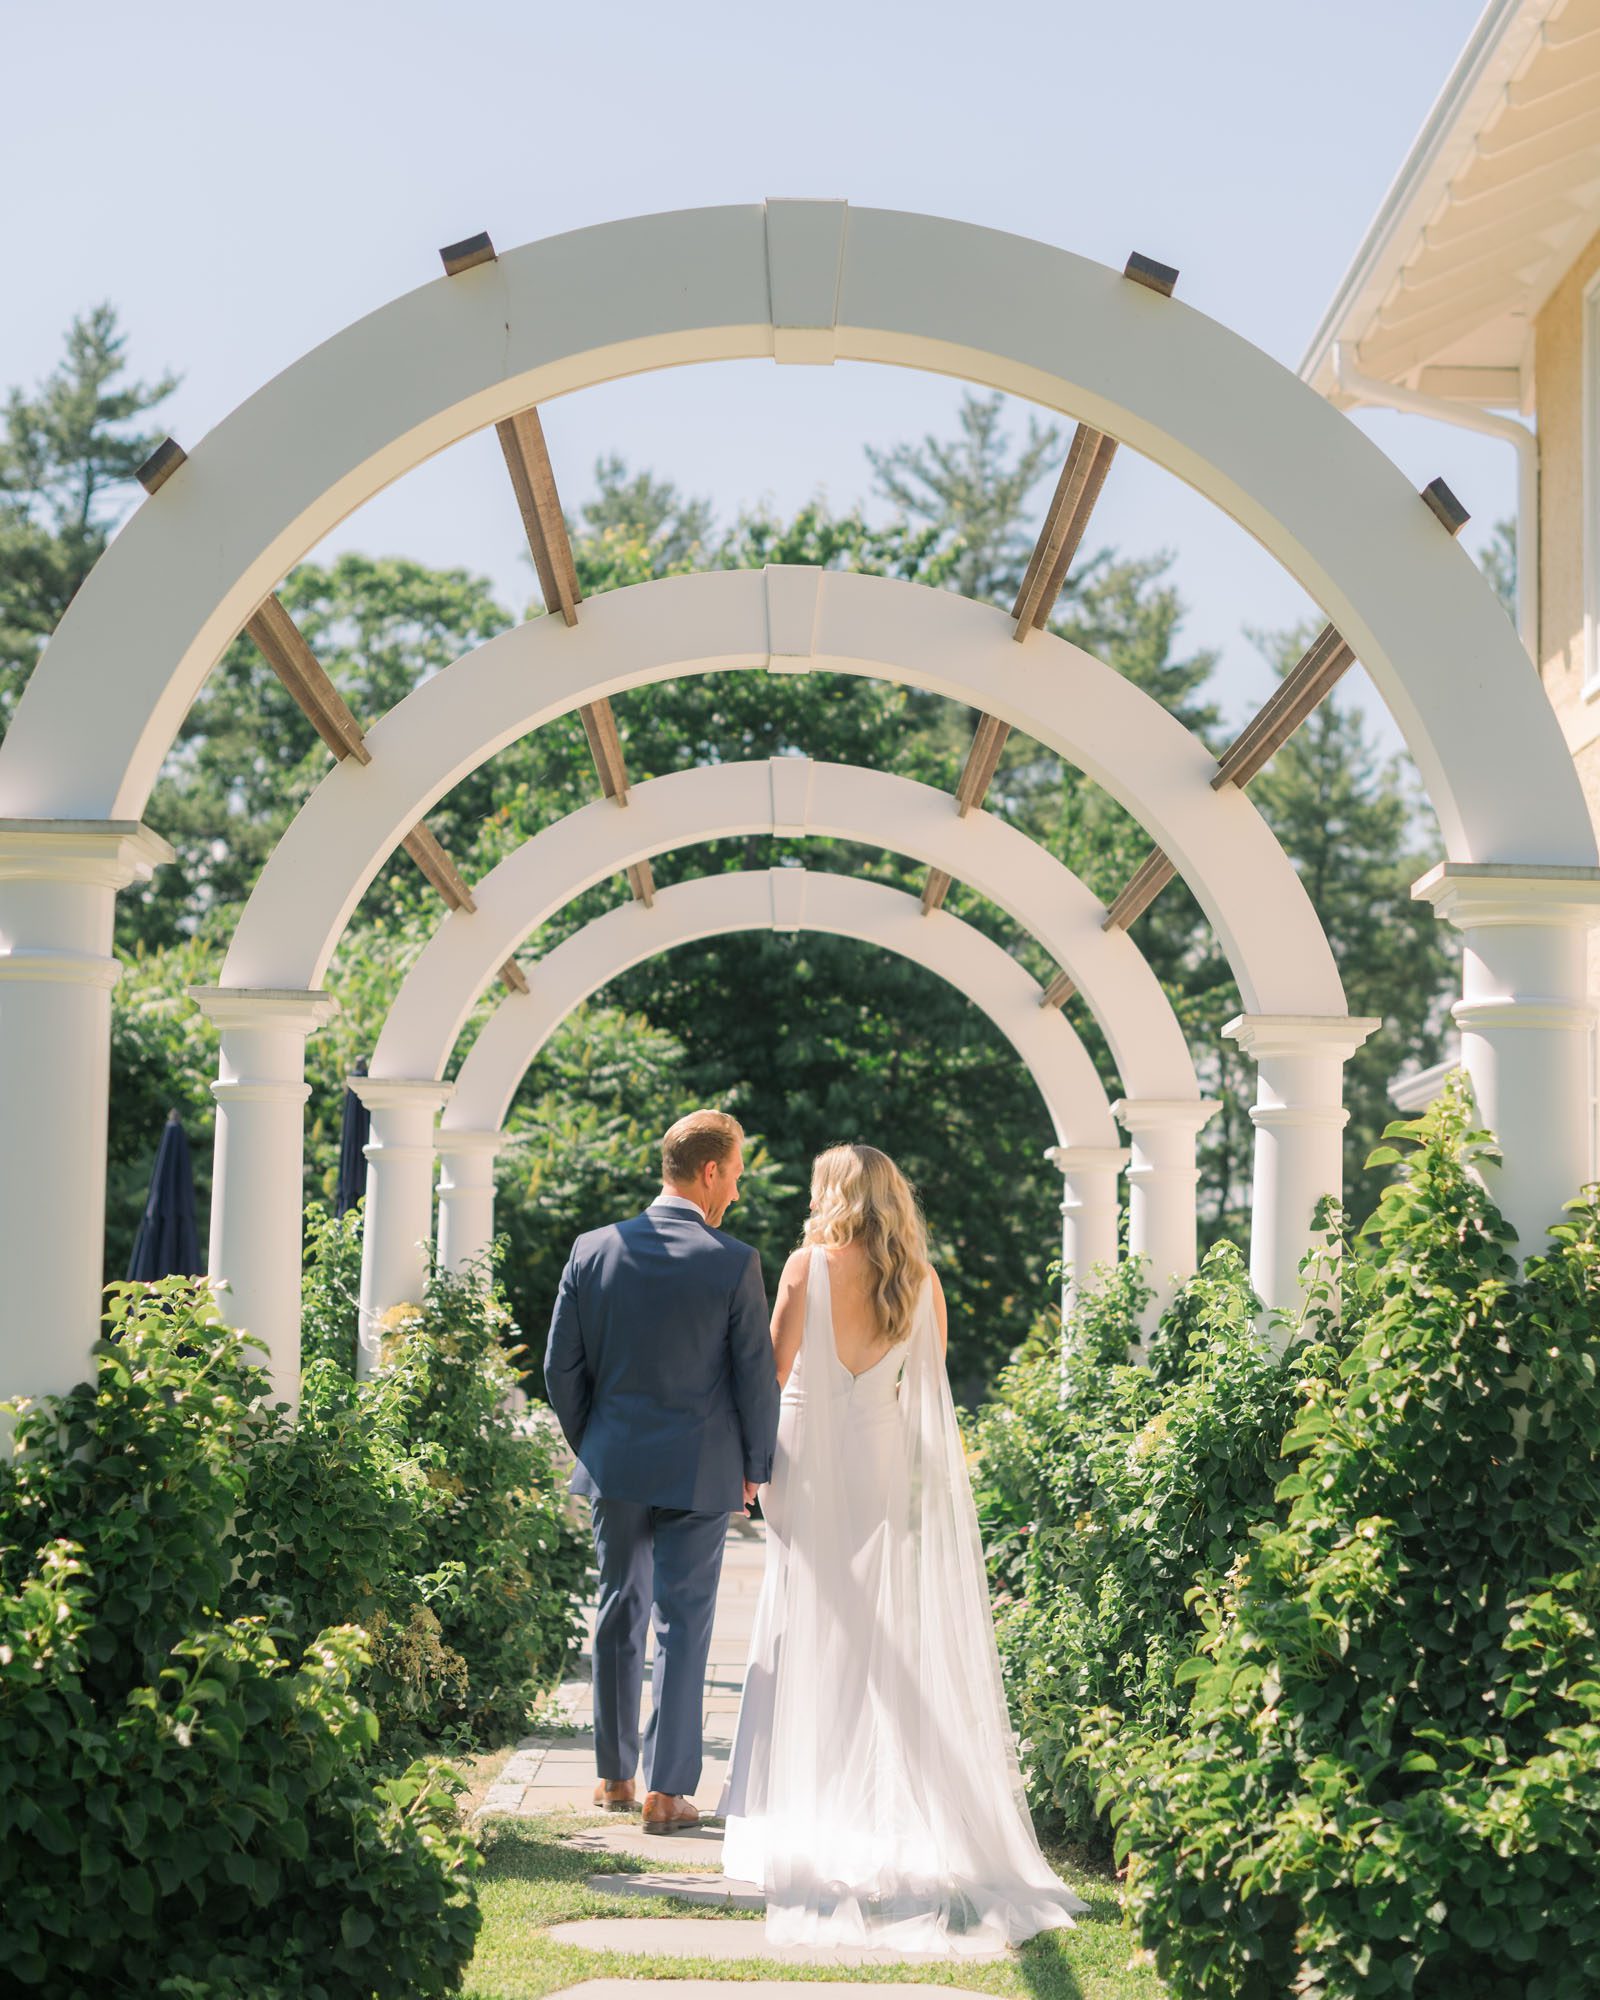 Wedding photography at York Maine private residence. Bride and groom walking under an archway.